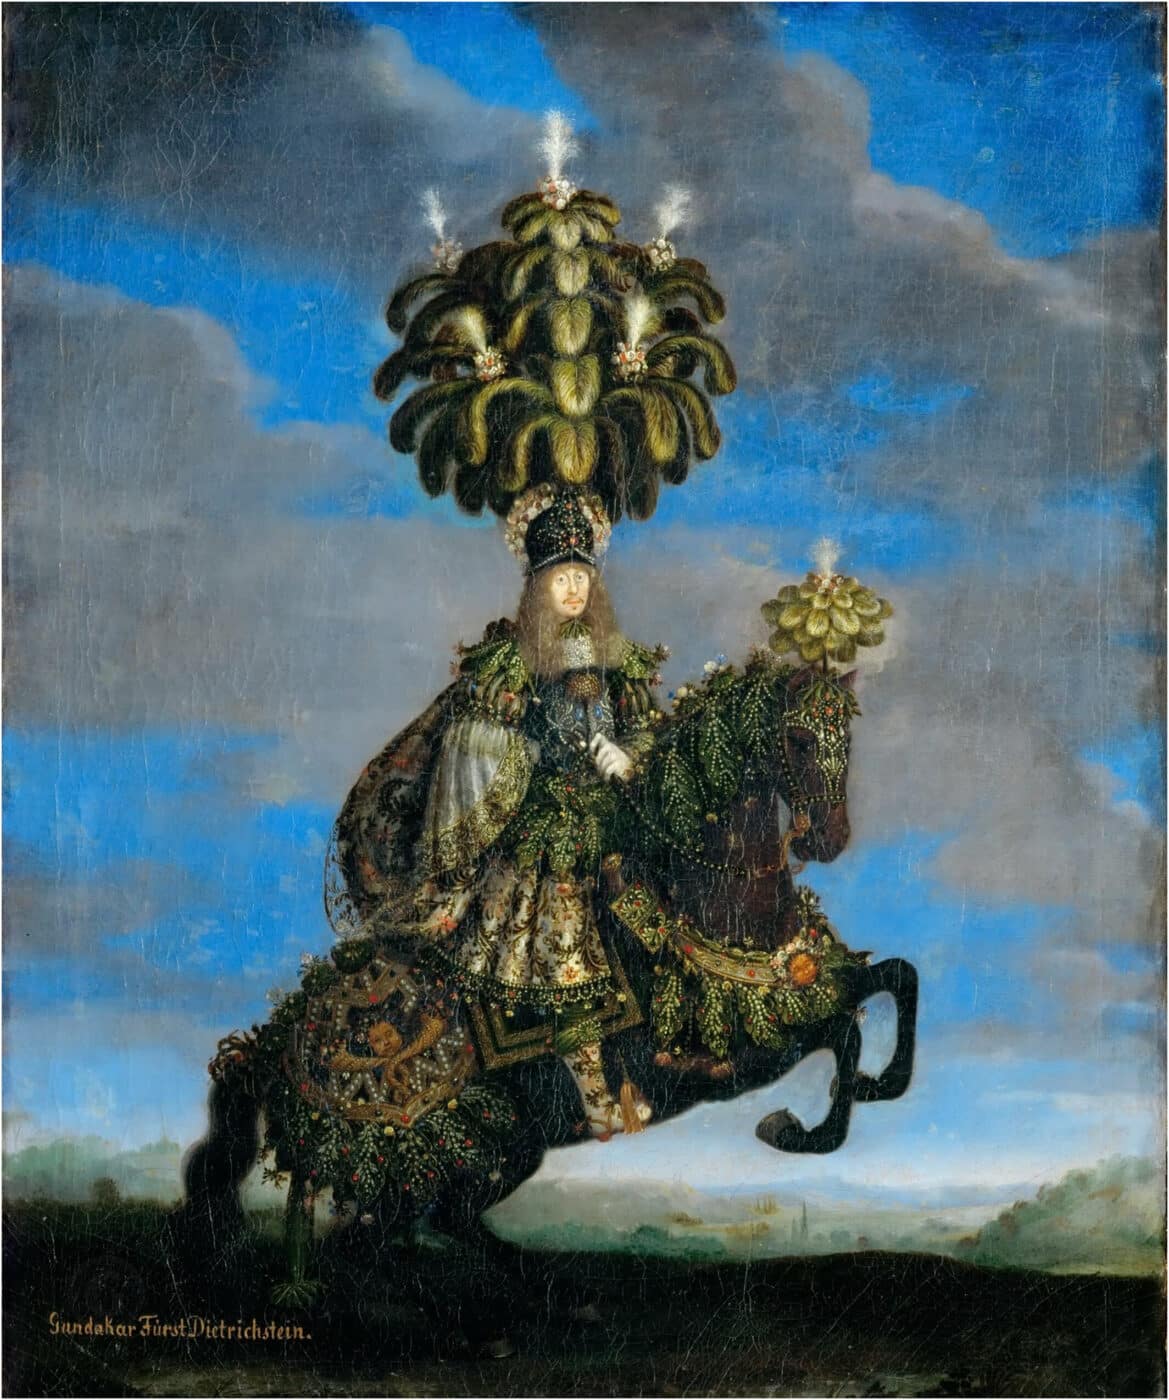 Gundakar, Prince of Dietrichstein, dons an impressive feathered headdress which signifies his power and royal status.